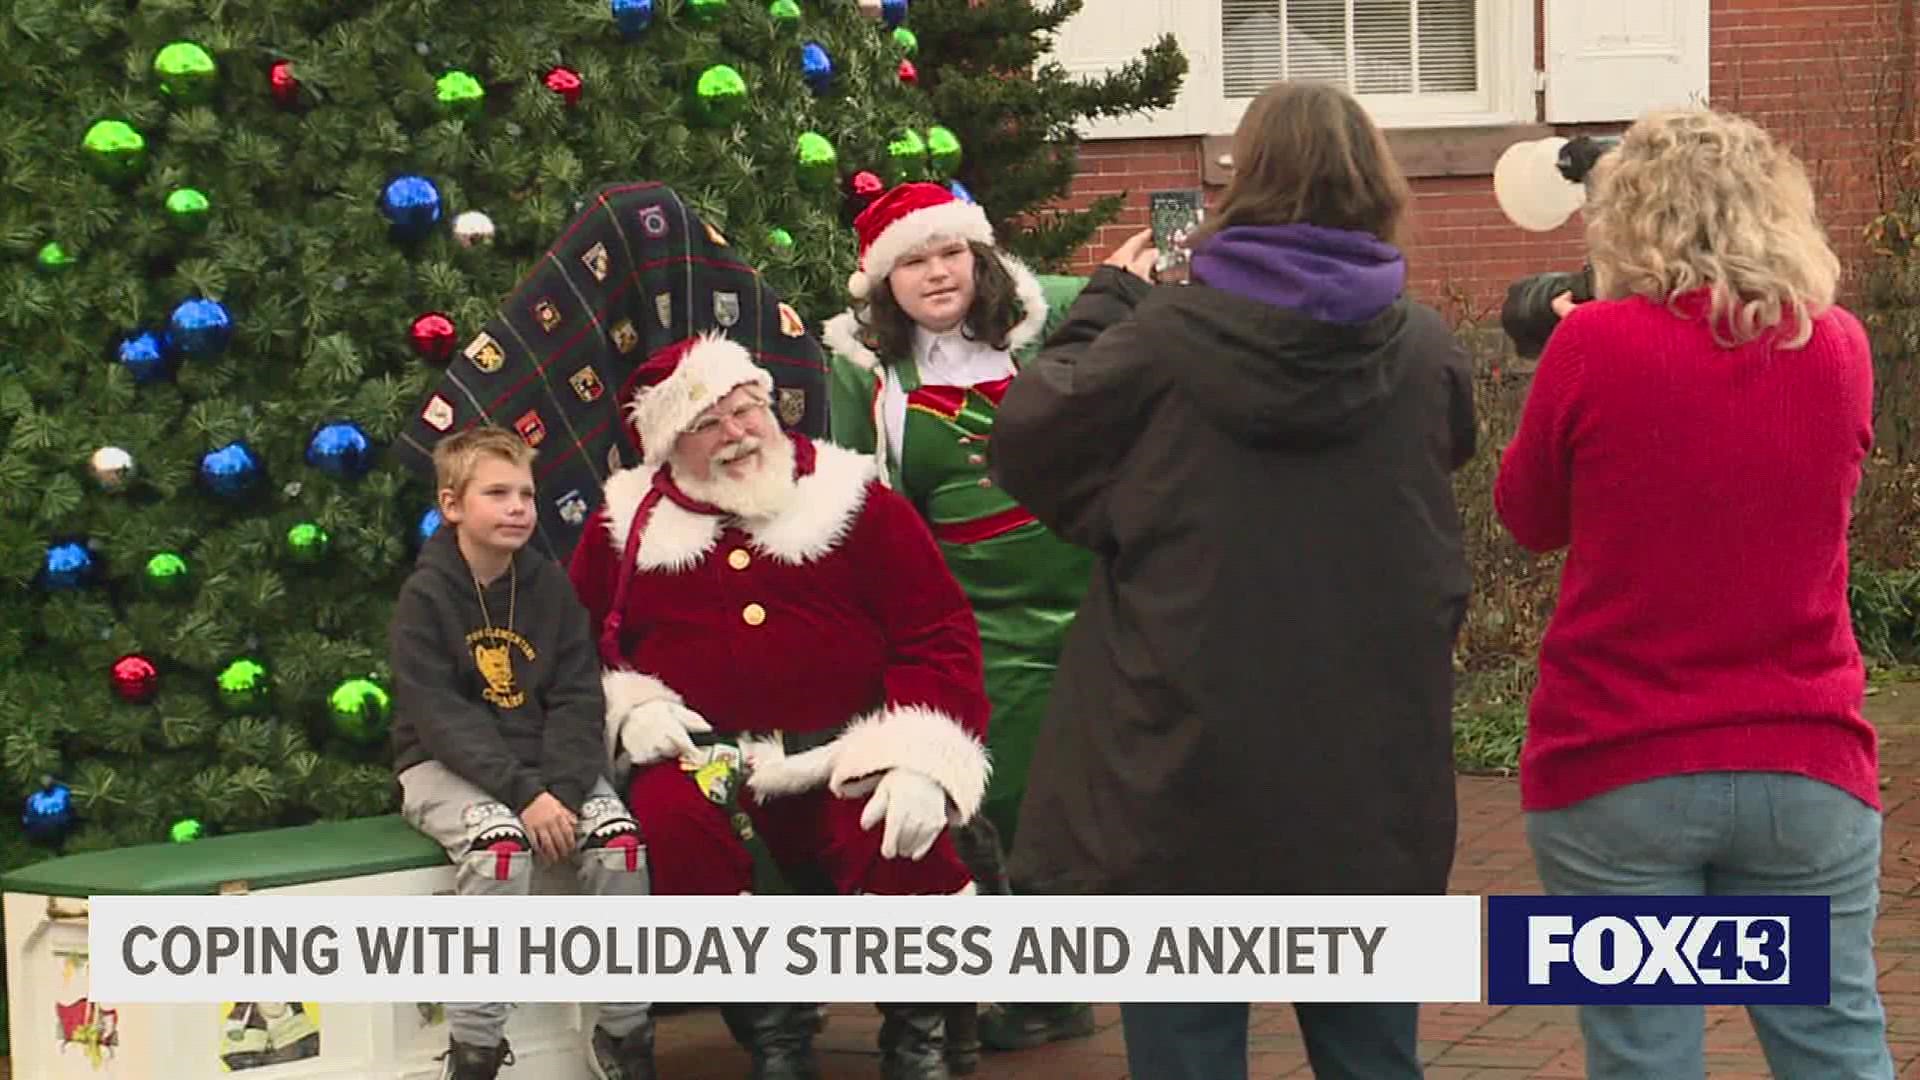 Research shows 64% of people with mental illness have worse symptoms around the holidays.